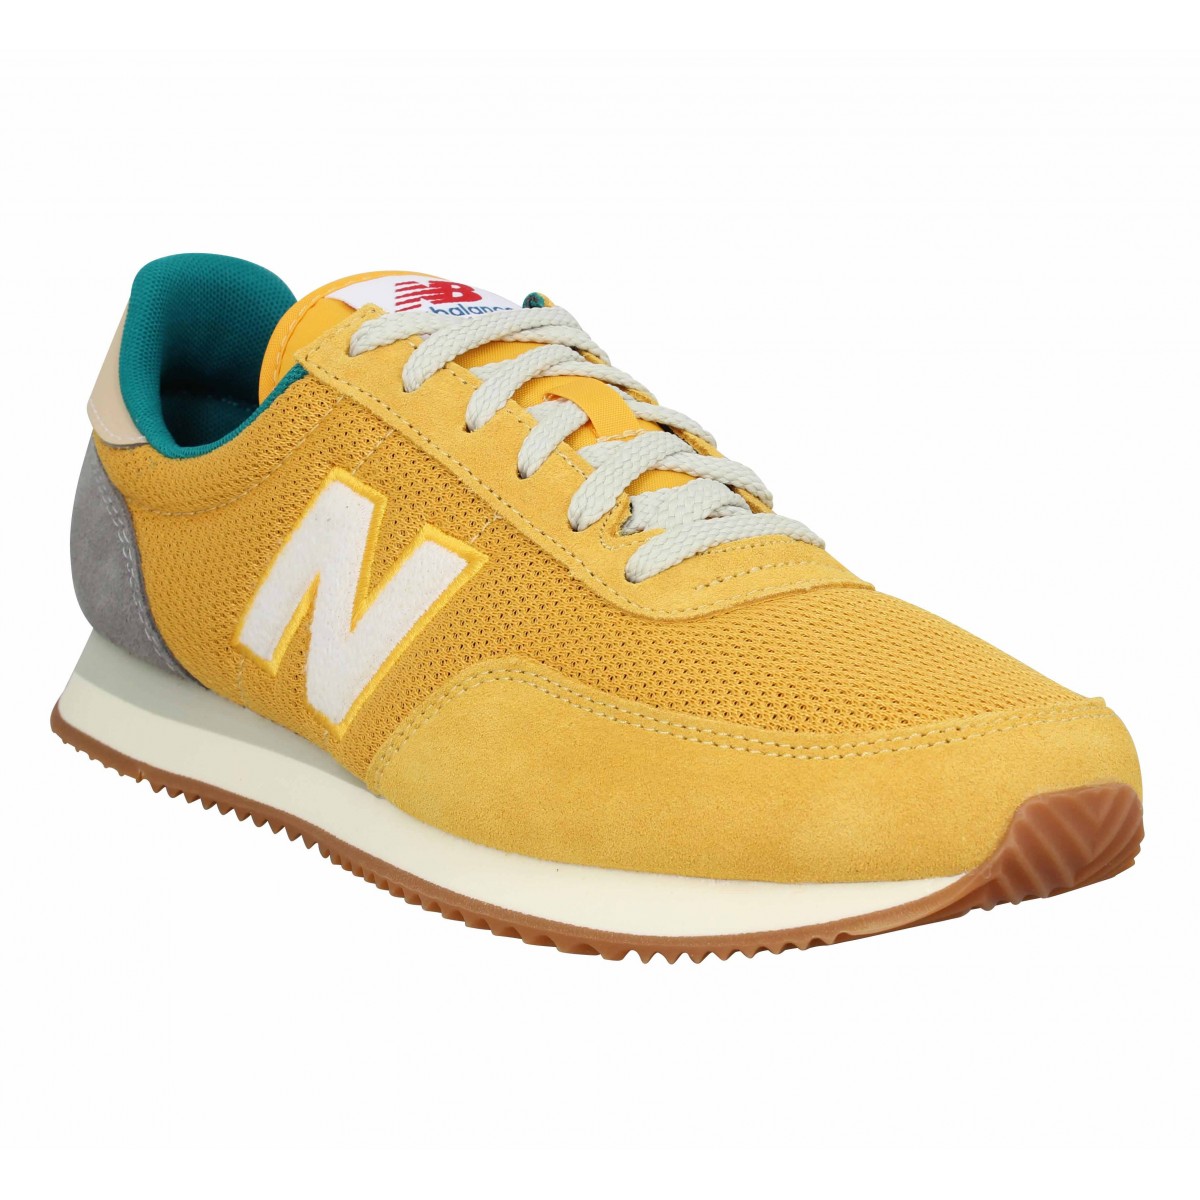 Chaussures New balance 720 yb velours toile homme jaune homme ...